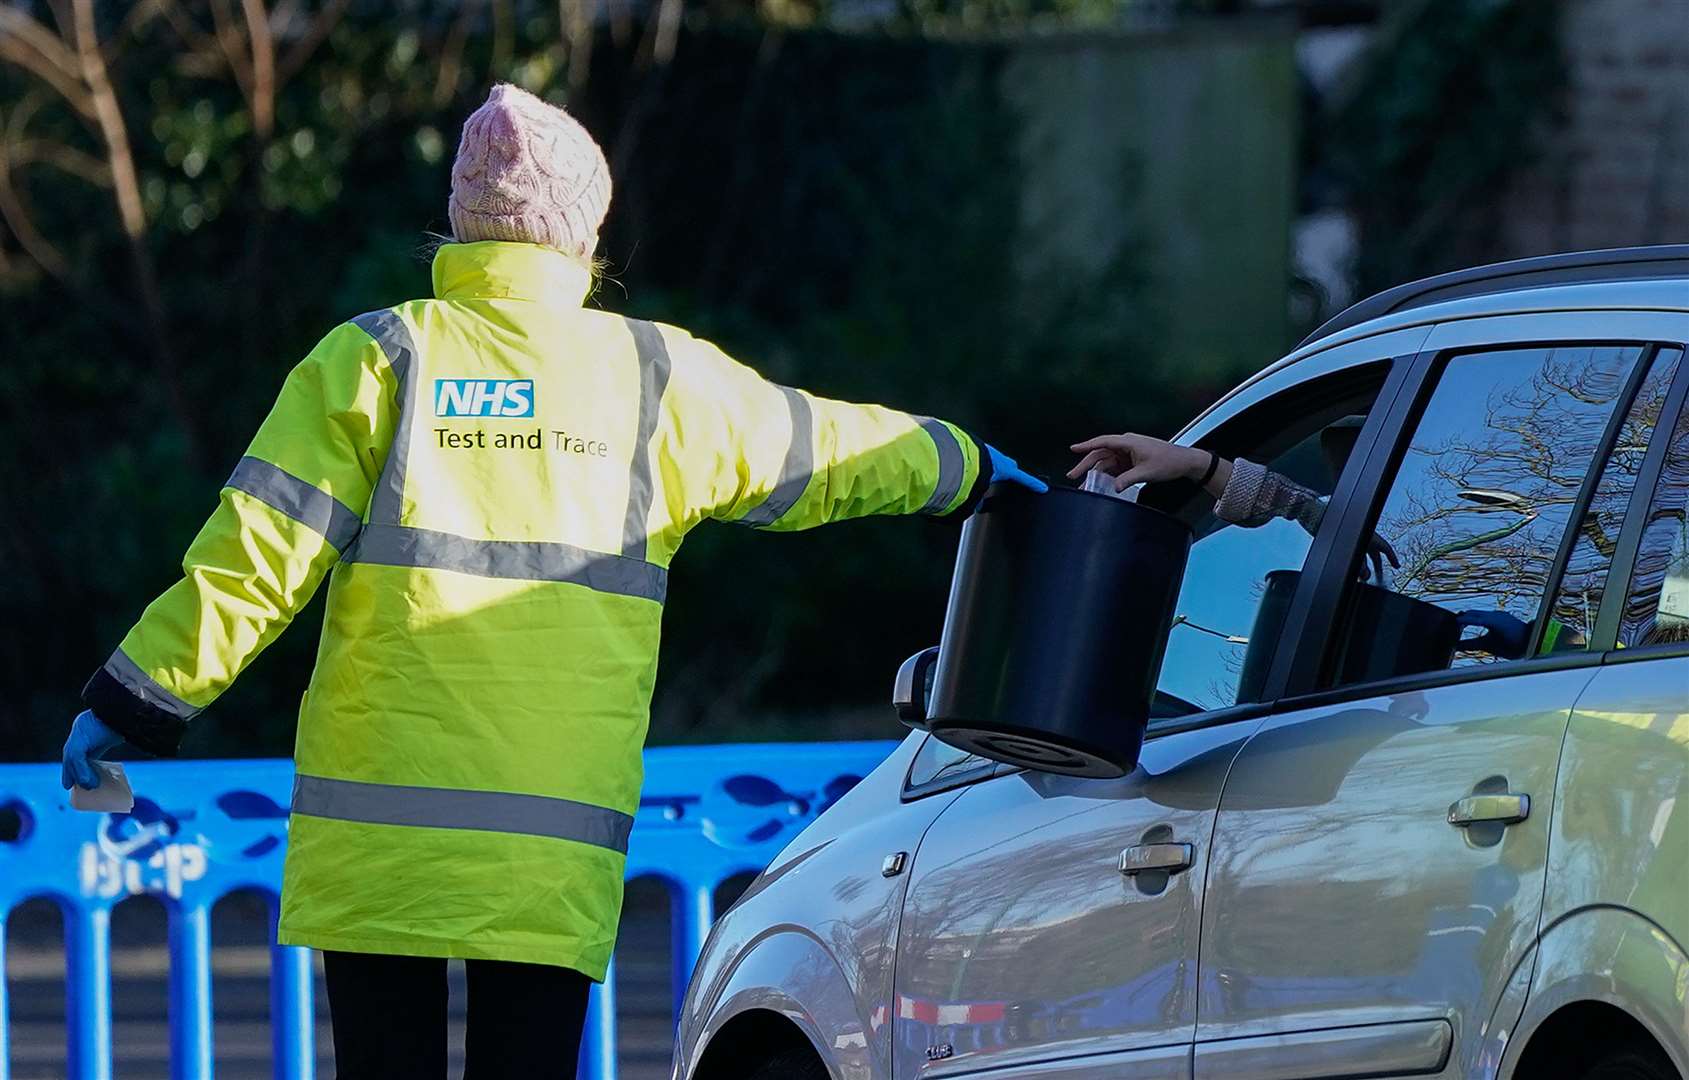 A member of NHS Test and Trace collects a sample from a member of the public at the drive-thru Covid-19 testing site on Hawkwood Road in Bournemouth (Andrew Matthews/PA)